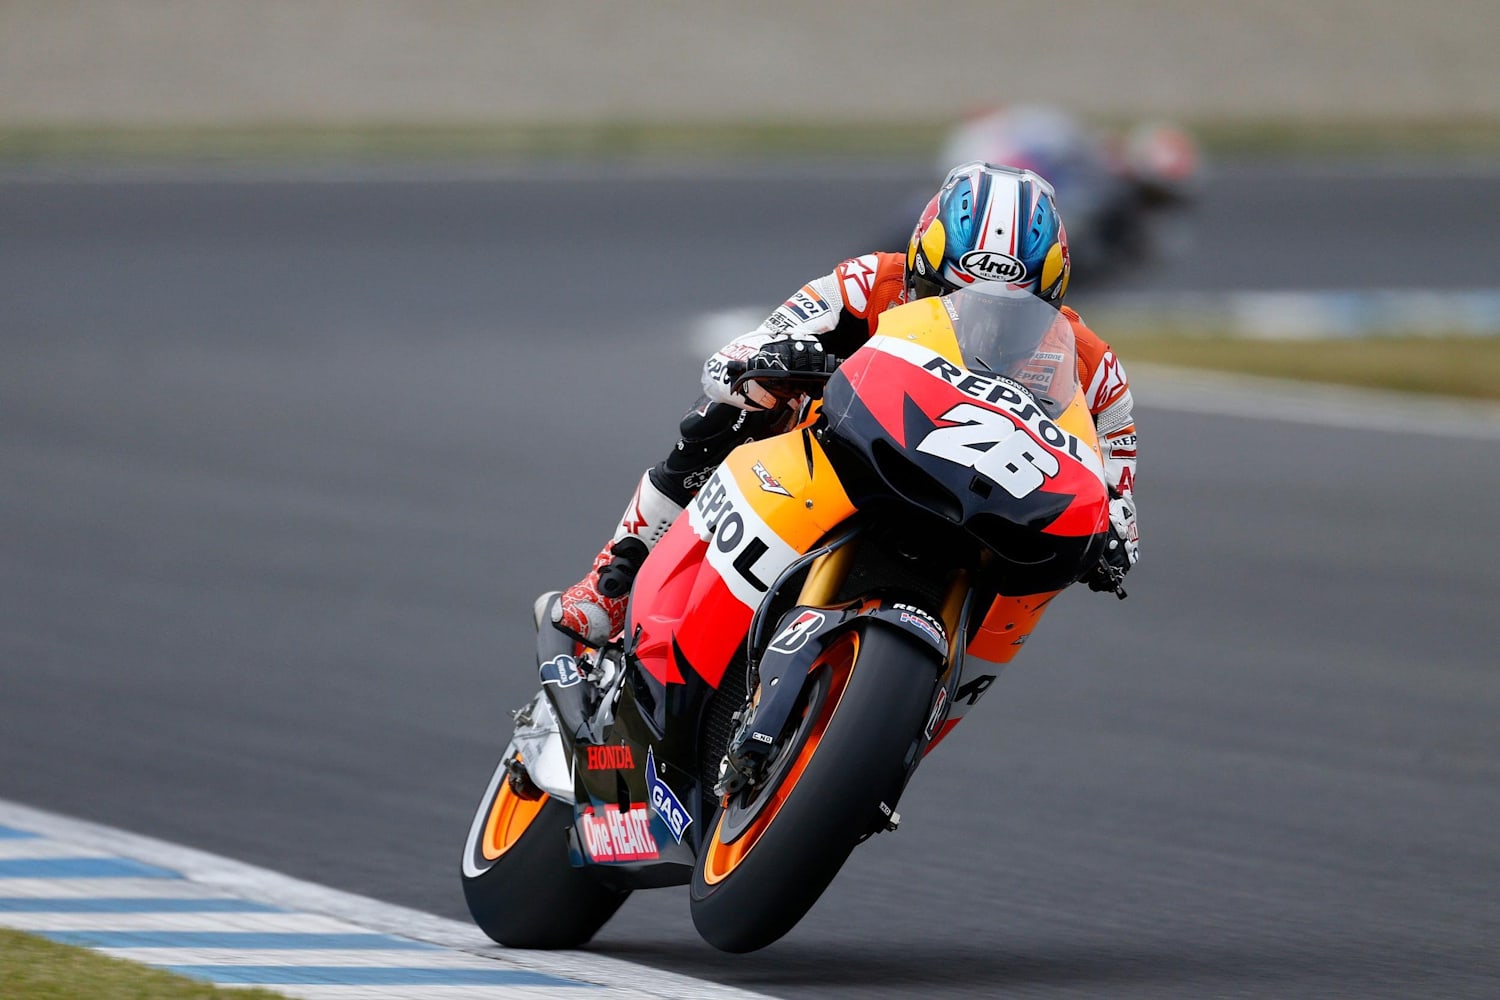 Some gripping shots from the Japanese MotoGP